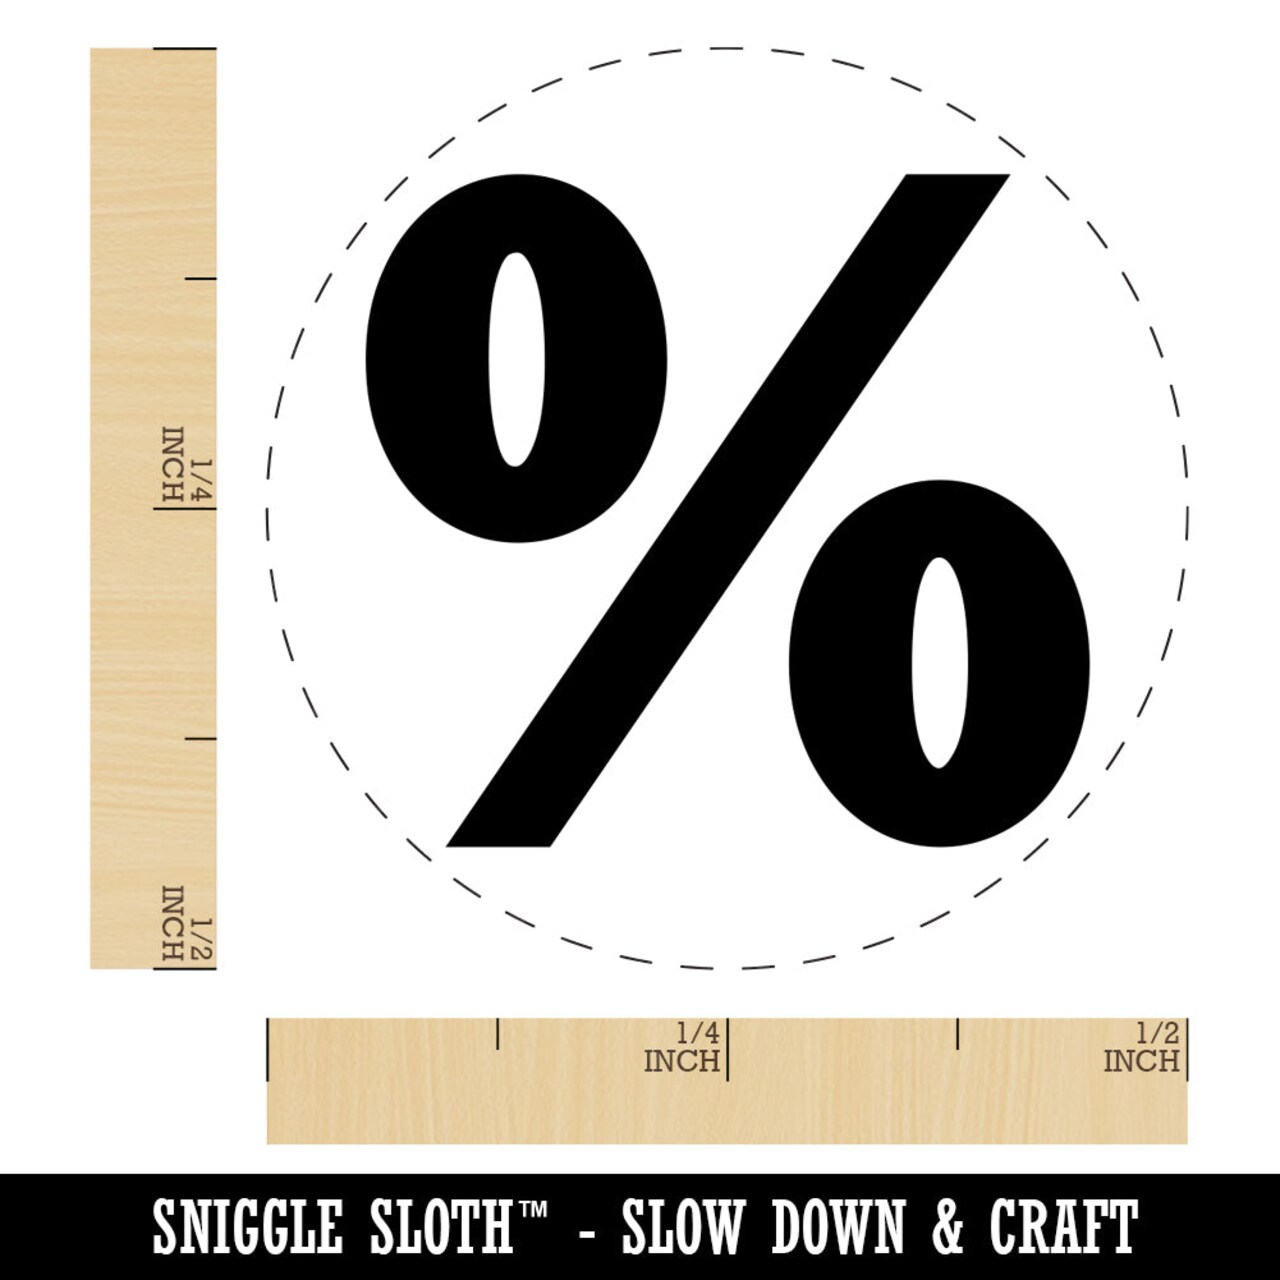 Percent Symbol Self-Inking Rubber Stamp for Stamping Crafting Planners